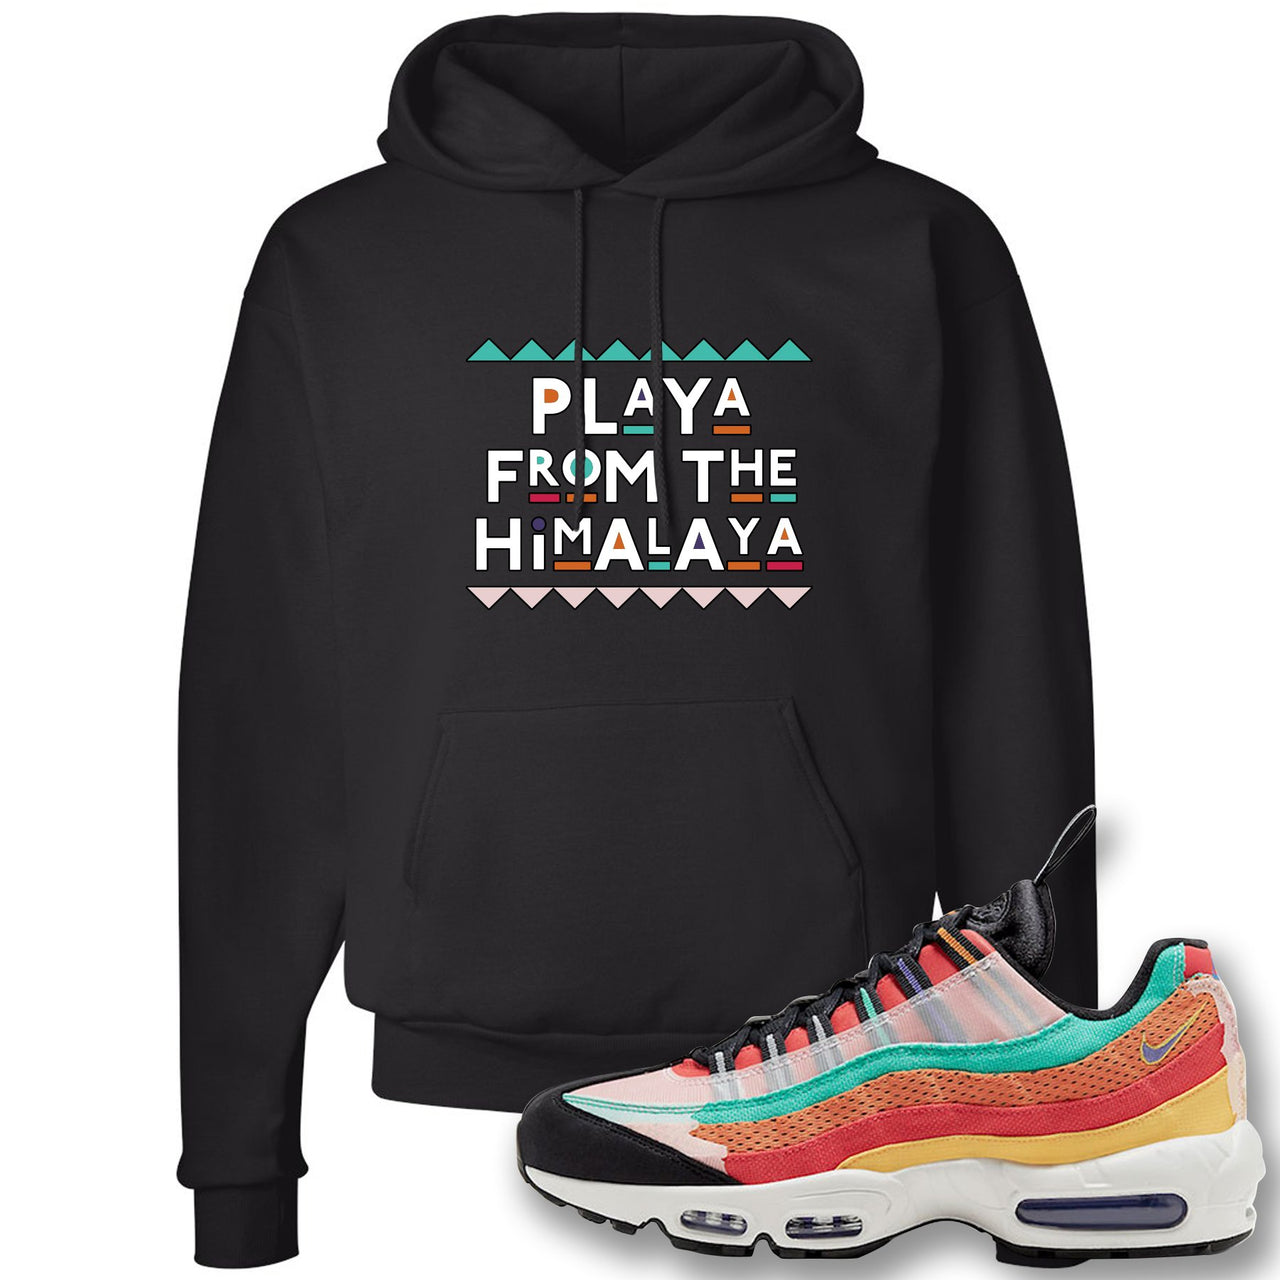 Air Max 95 Black History Month Sneaker Black Pullover Hoodie | Hoodie to match Nike Air Max 95 Black History Month Shoes | Playa From The Himalaya